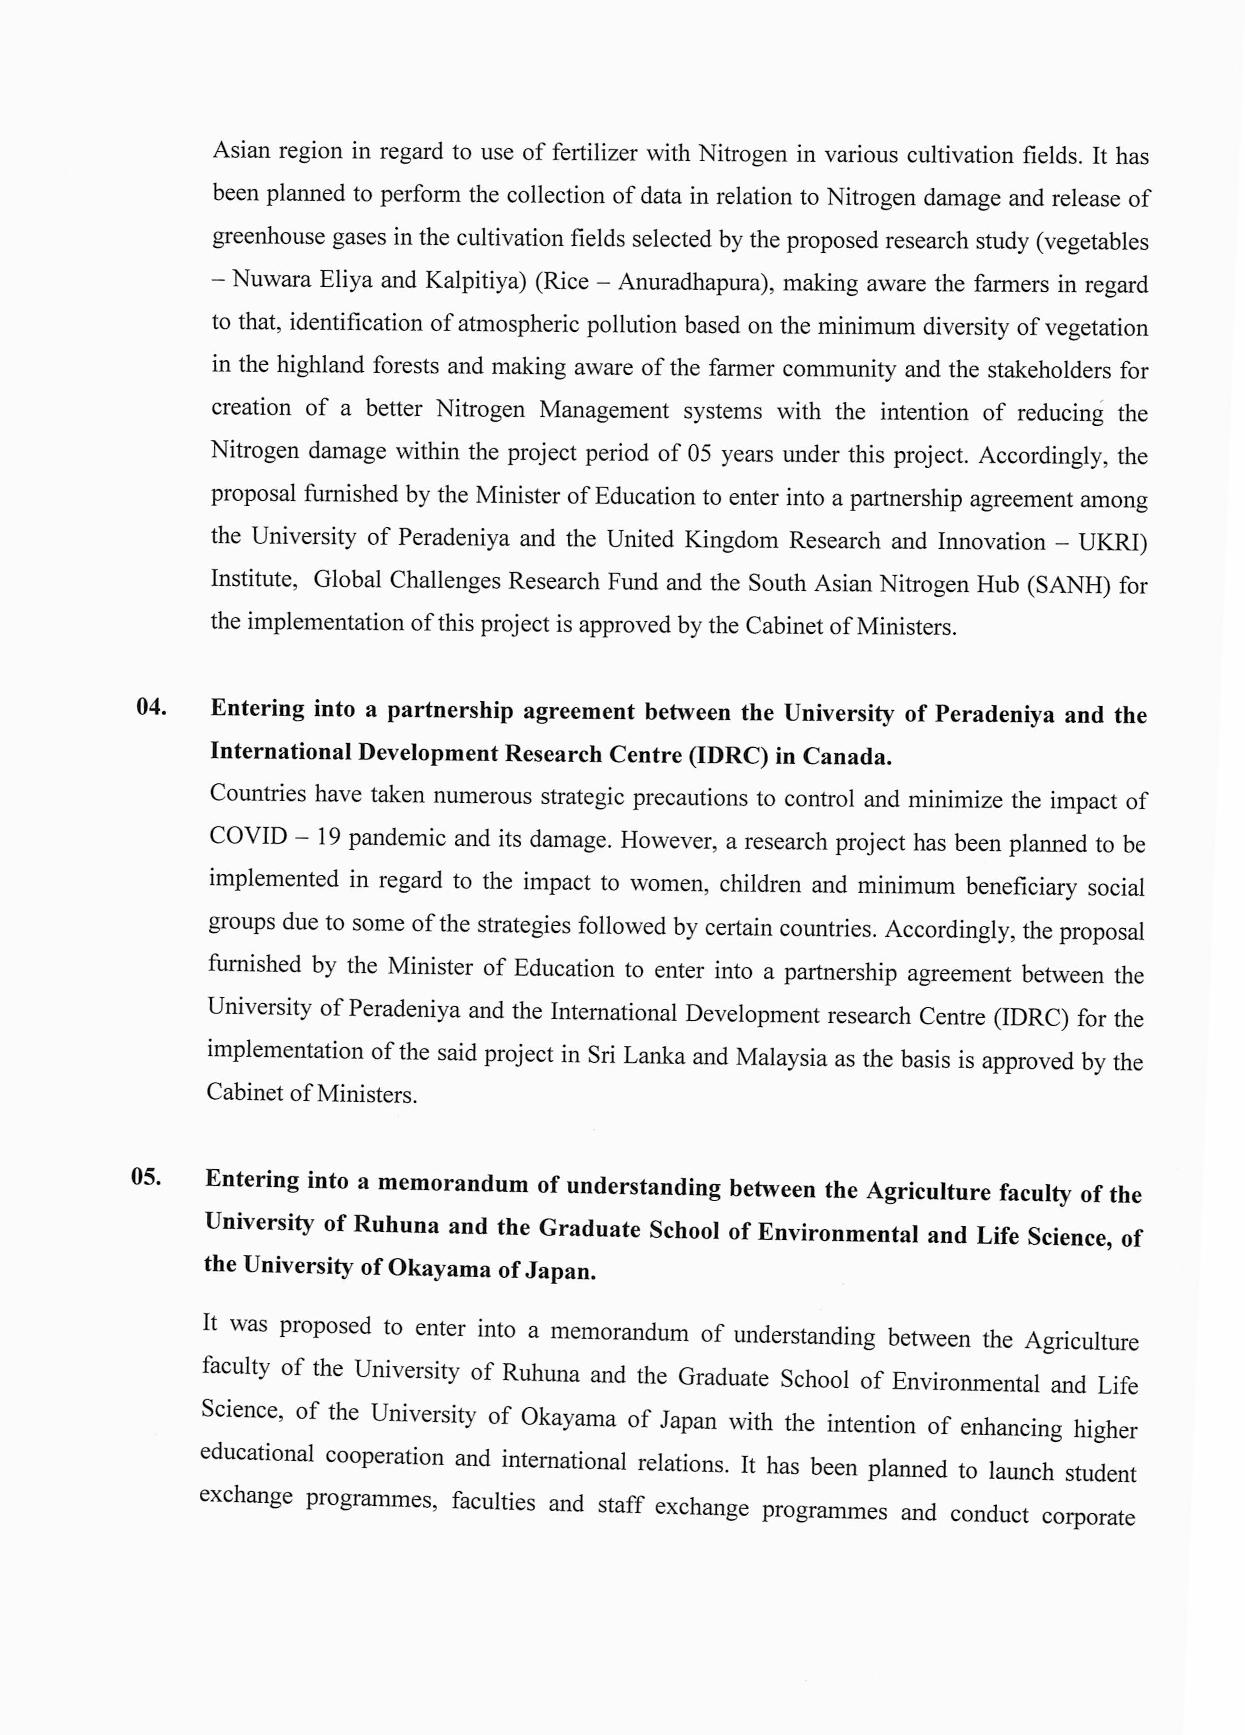 Cabinet Desision on 29.03.2021 English page 002